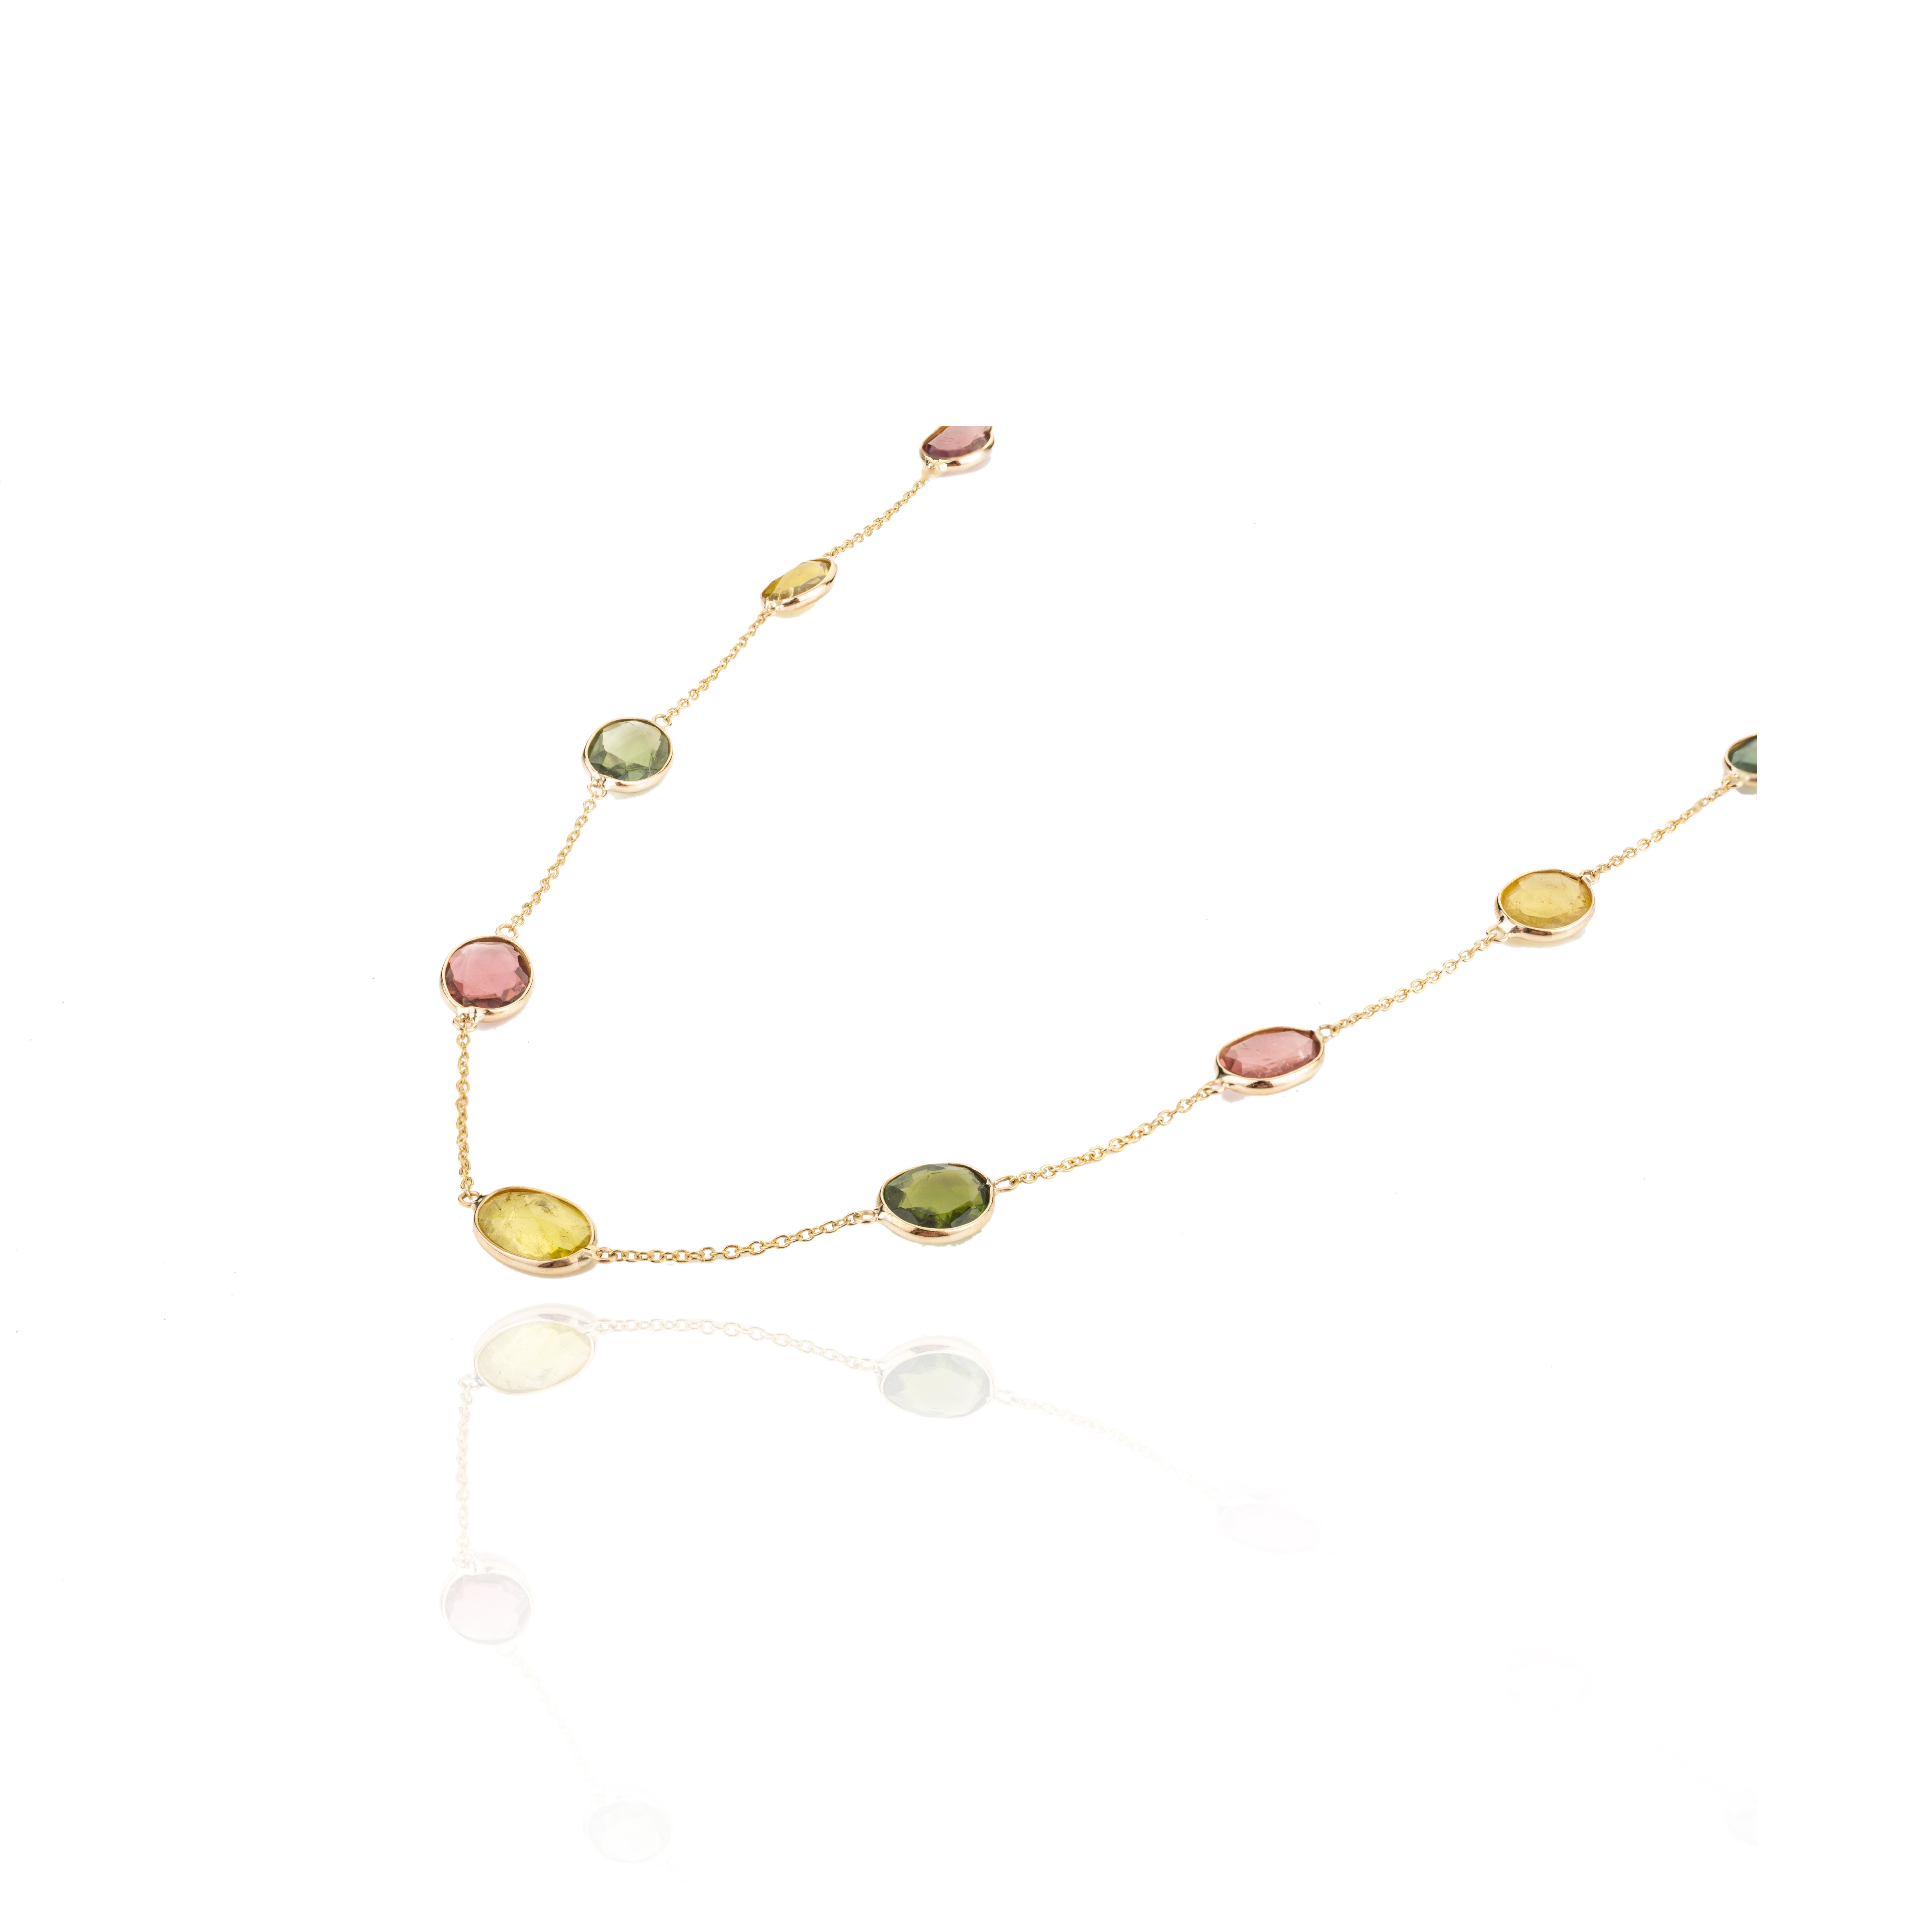 Modern 8.25 Carat Natural Tourmaline Station Chain Necklace in 18k Yellow Gold for Mom For Sale